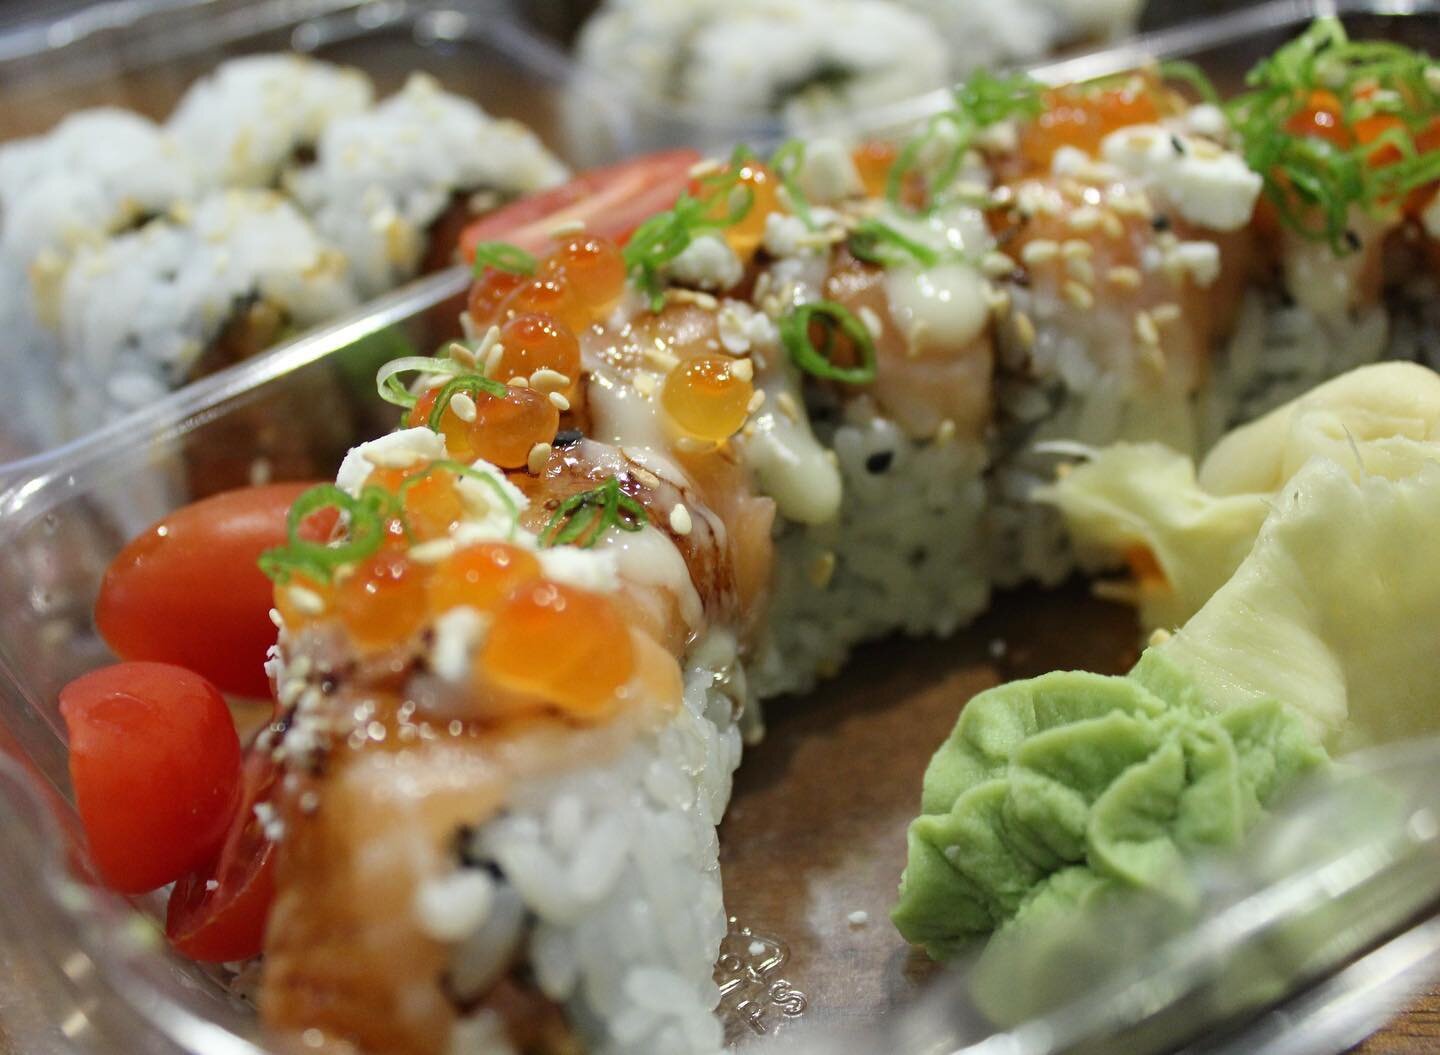 &bull; Out Of Control Roll (packed for carry out) &bull;

ingredients:
snow crab, masago, avocado, spicy tuna topped with salmon, balsamic sauce, garlic mayo, feta cheese, tomato, ikura

photo creds:
@jayniescameraroll

COME VISIT US!
📍 find us on y